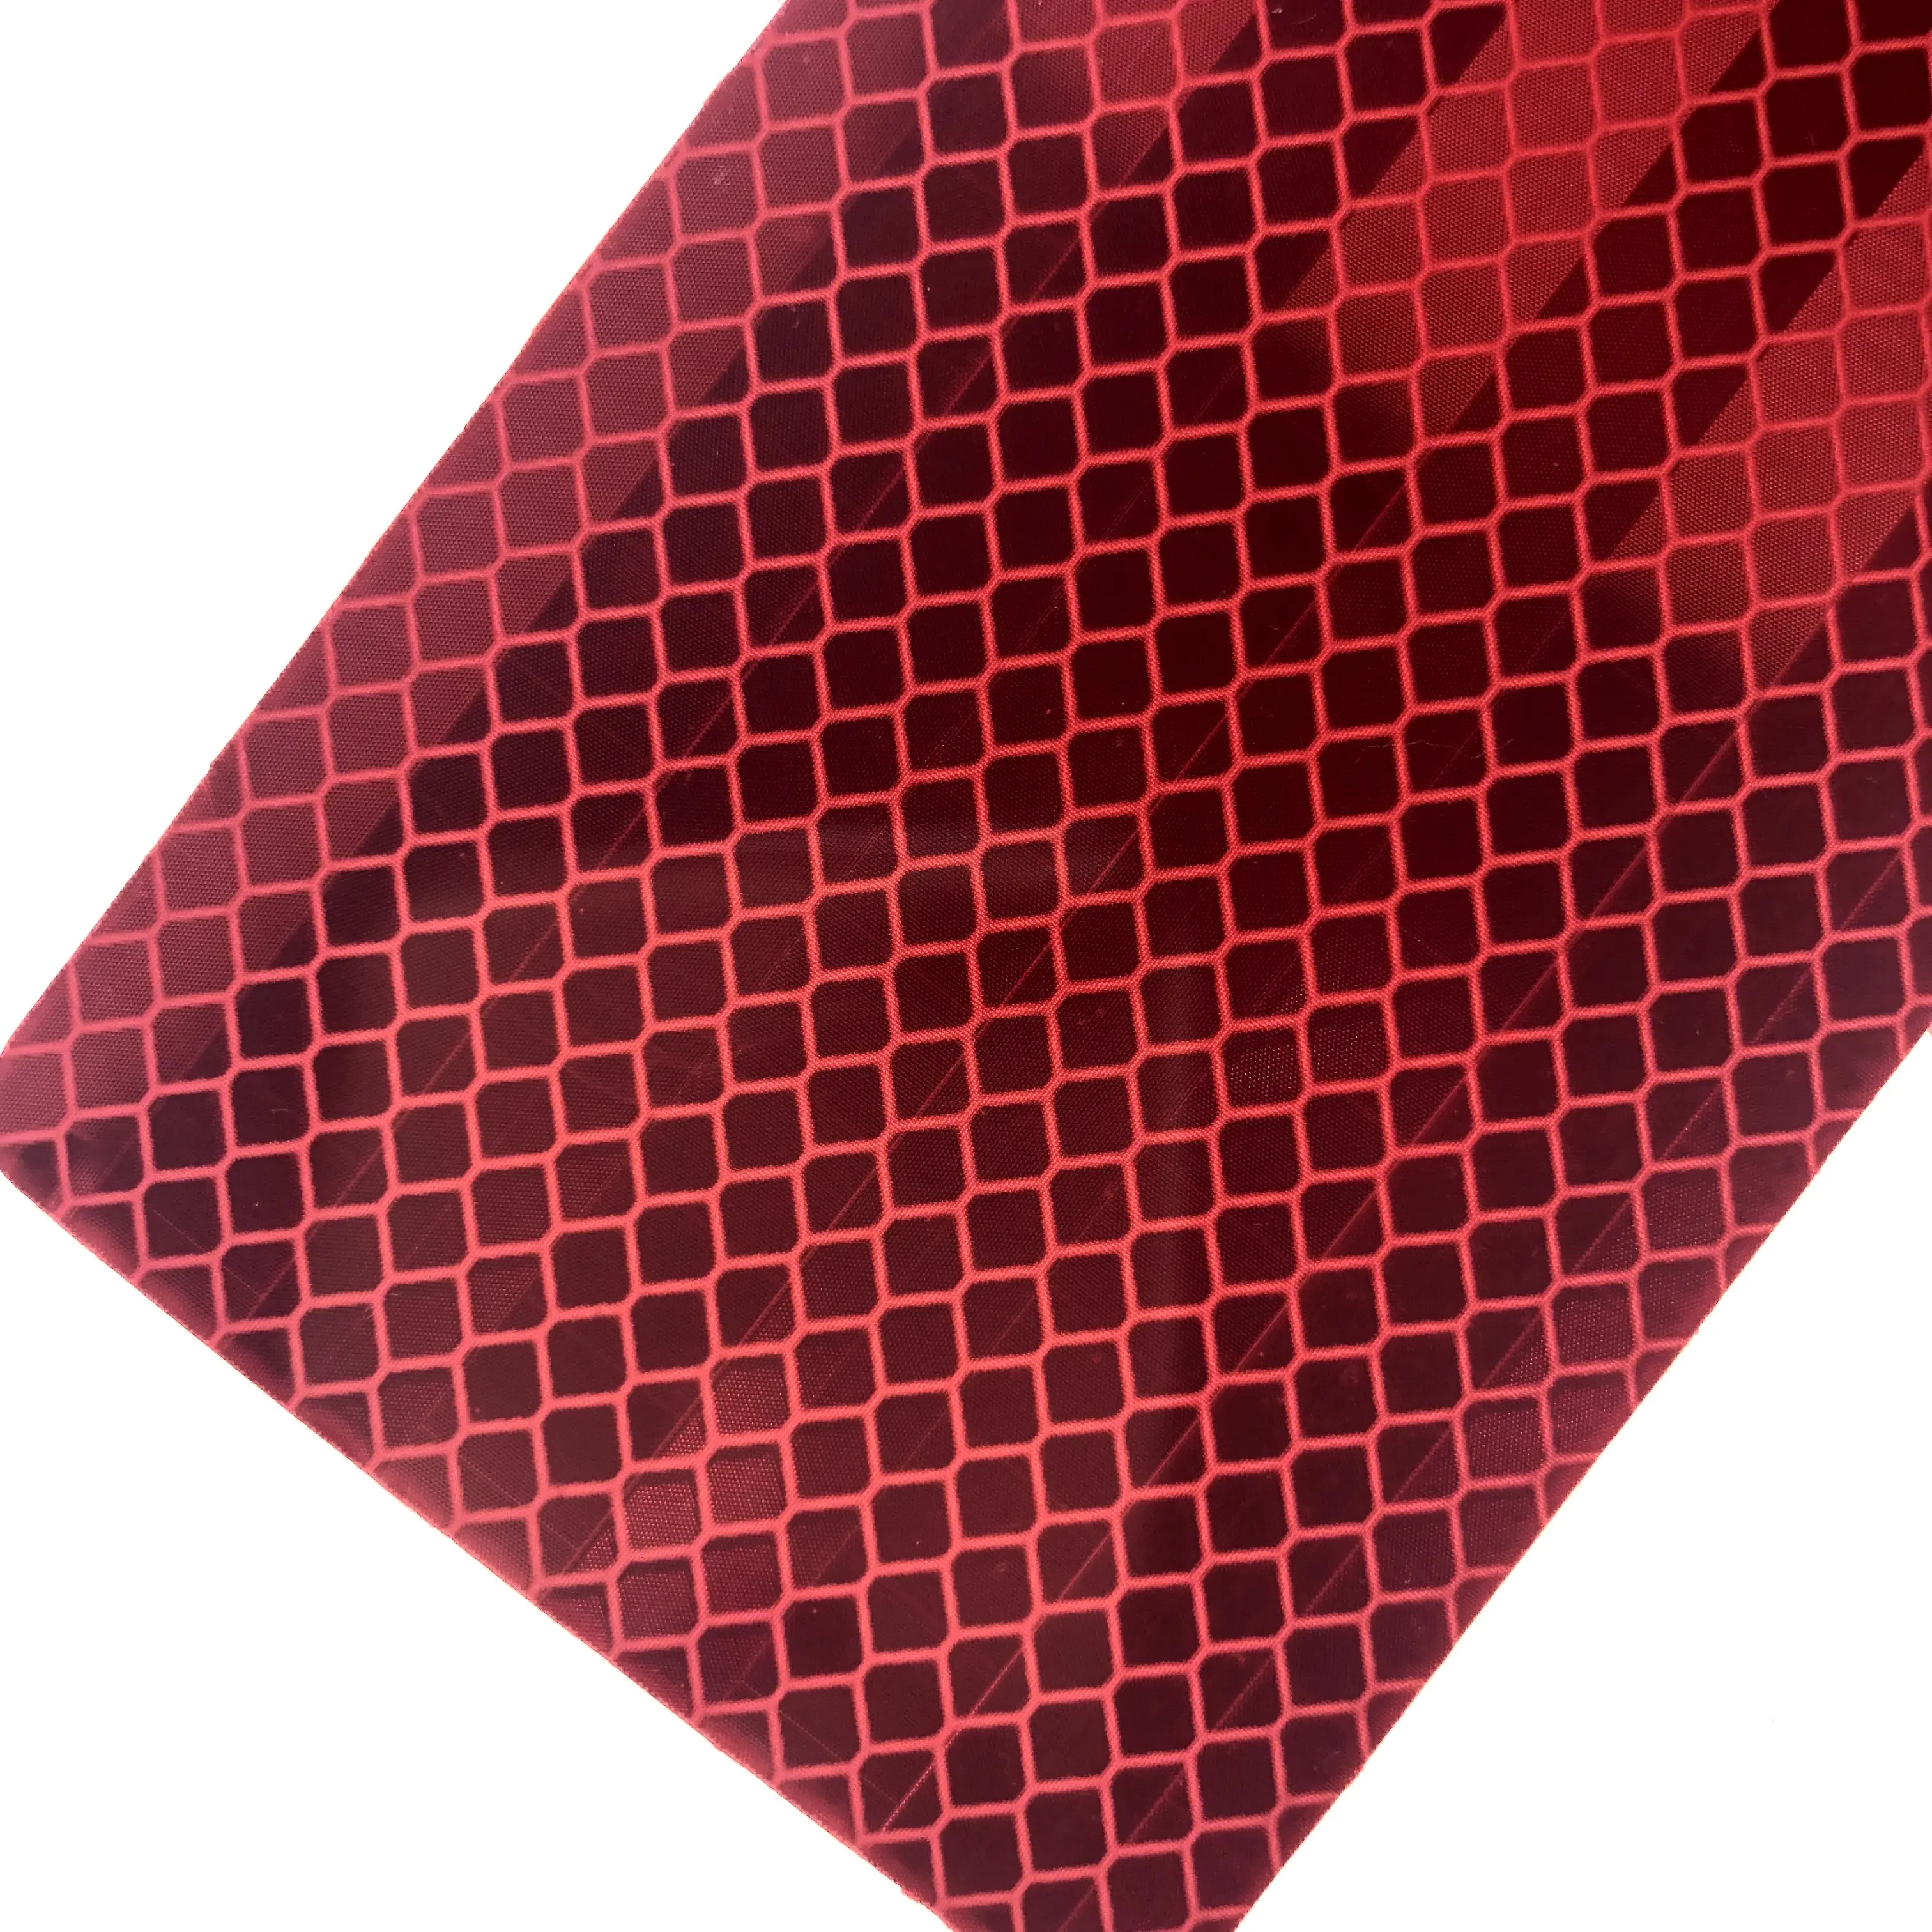 3 m Engineer Grade Prismatic Reflective Sheeting 3432 Red reflective tape